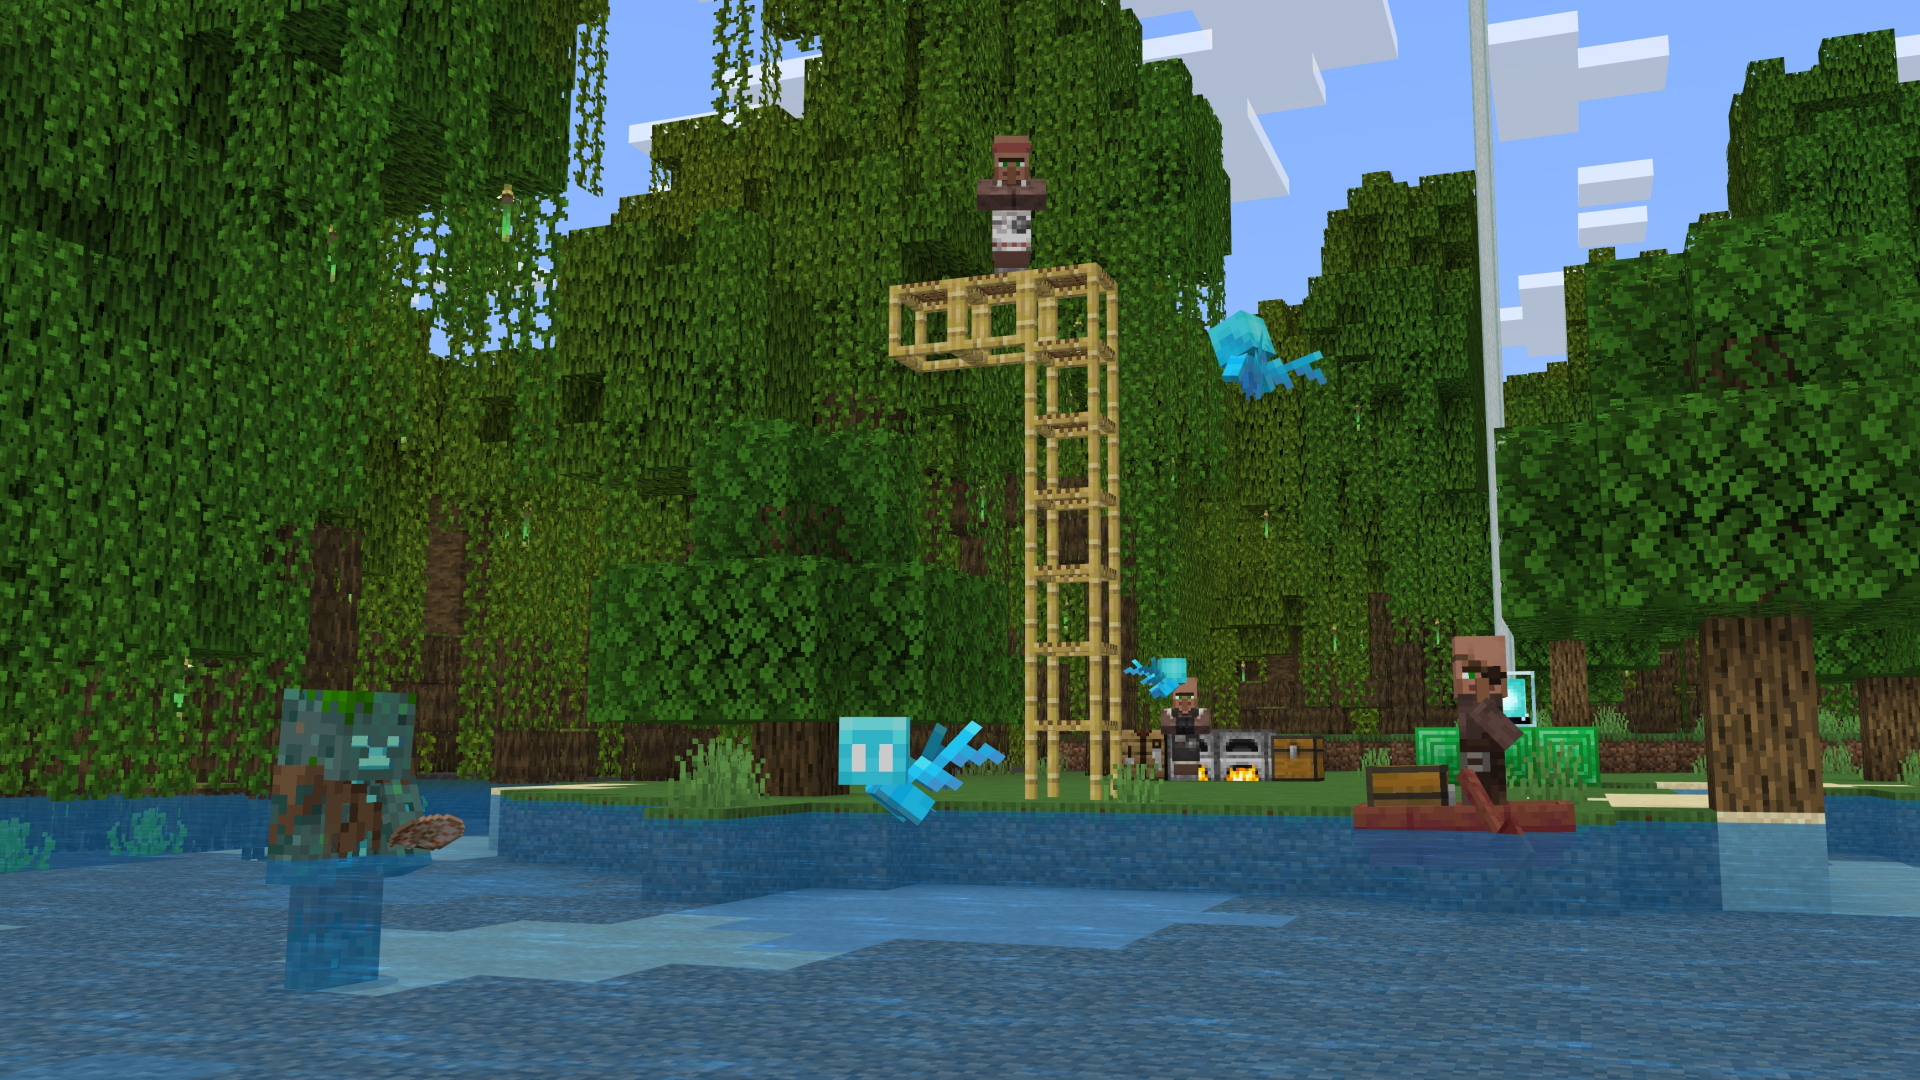 A Minecraft screenshot featuring villagers, allays, and some scaffolding.